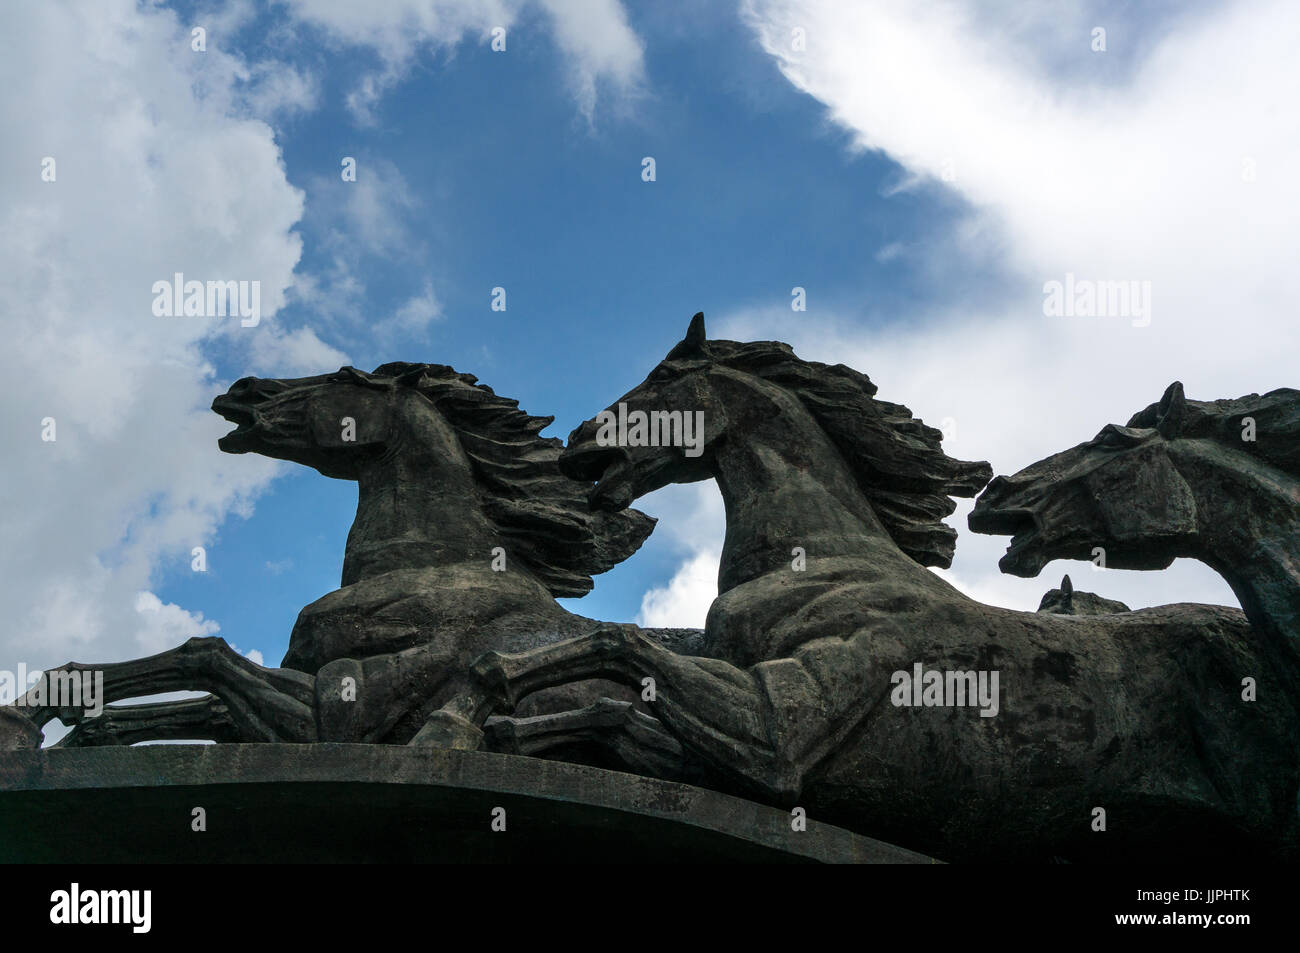 Horse statue evoking concept of strength, power, beauty and speed at Lingzhi Park in Shenzhen, Guangdong province, China Stock Photo